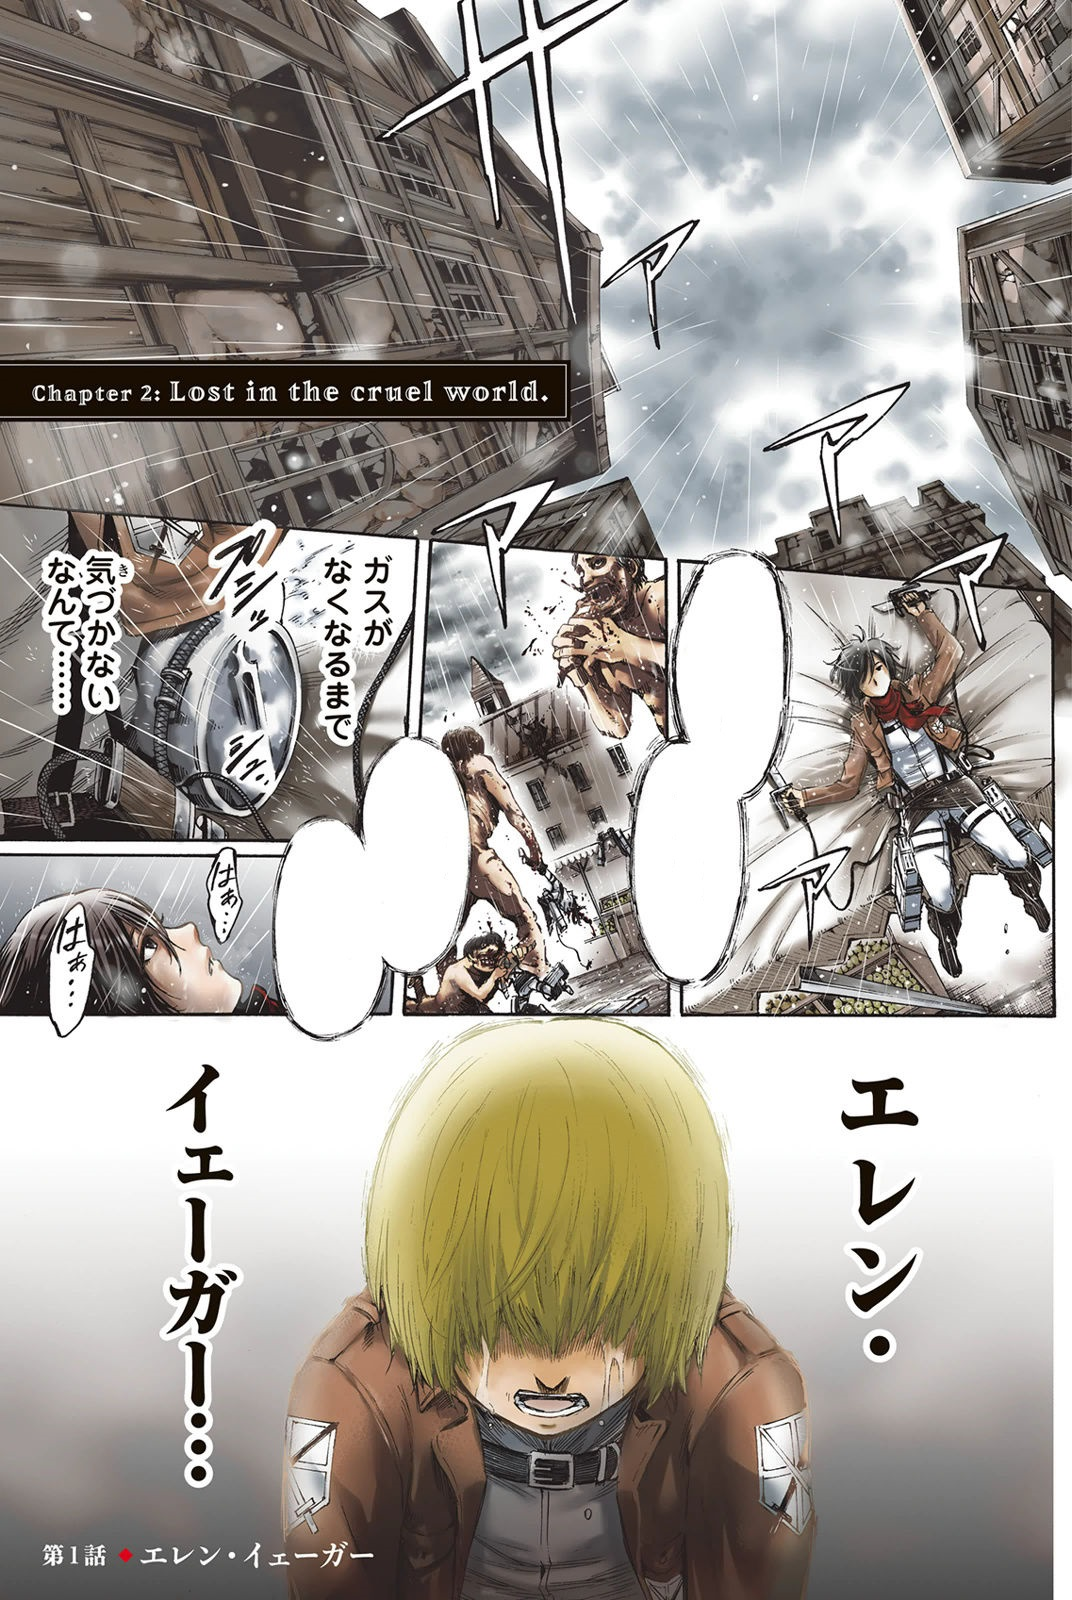 THE FINAL CHAPTERS Special 1, Attack on Titan Wiki